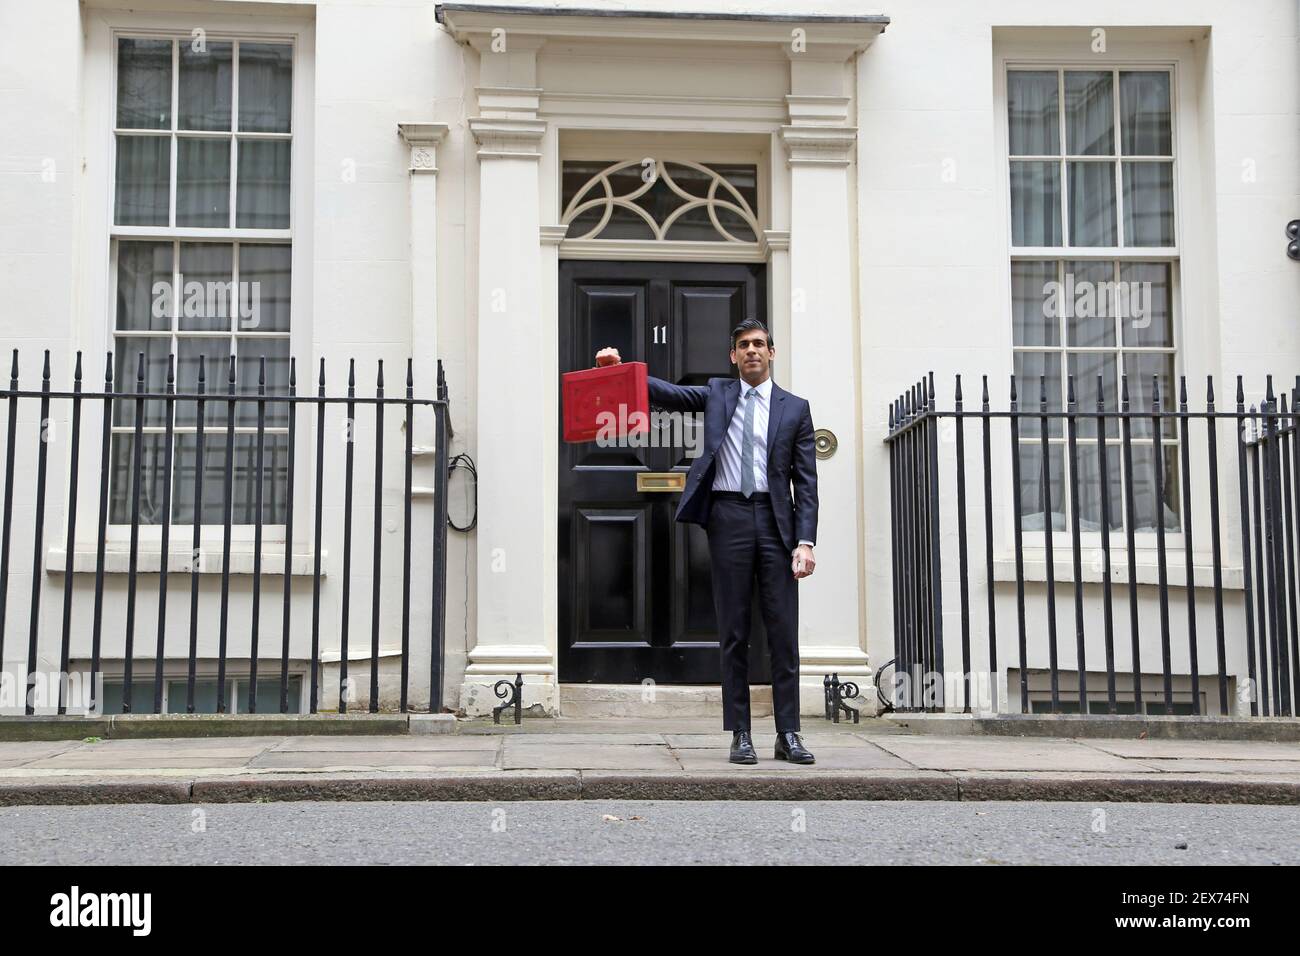 London, UK. 03rd Mar, 2021. Rishi Sunak the Chancellor of the Exchequer with the red Budget Box outside Number 11 Downing Street before he delivers his Budget speech in The House of Commons at lunchtime. Budget Day, Downing Street, Westminster, London, March 3, 2021. Credit: Paul Marriott/Alamy Live News Stock Photo